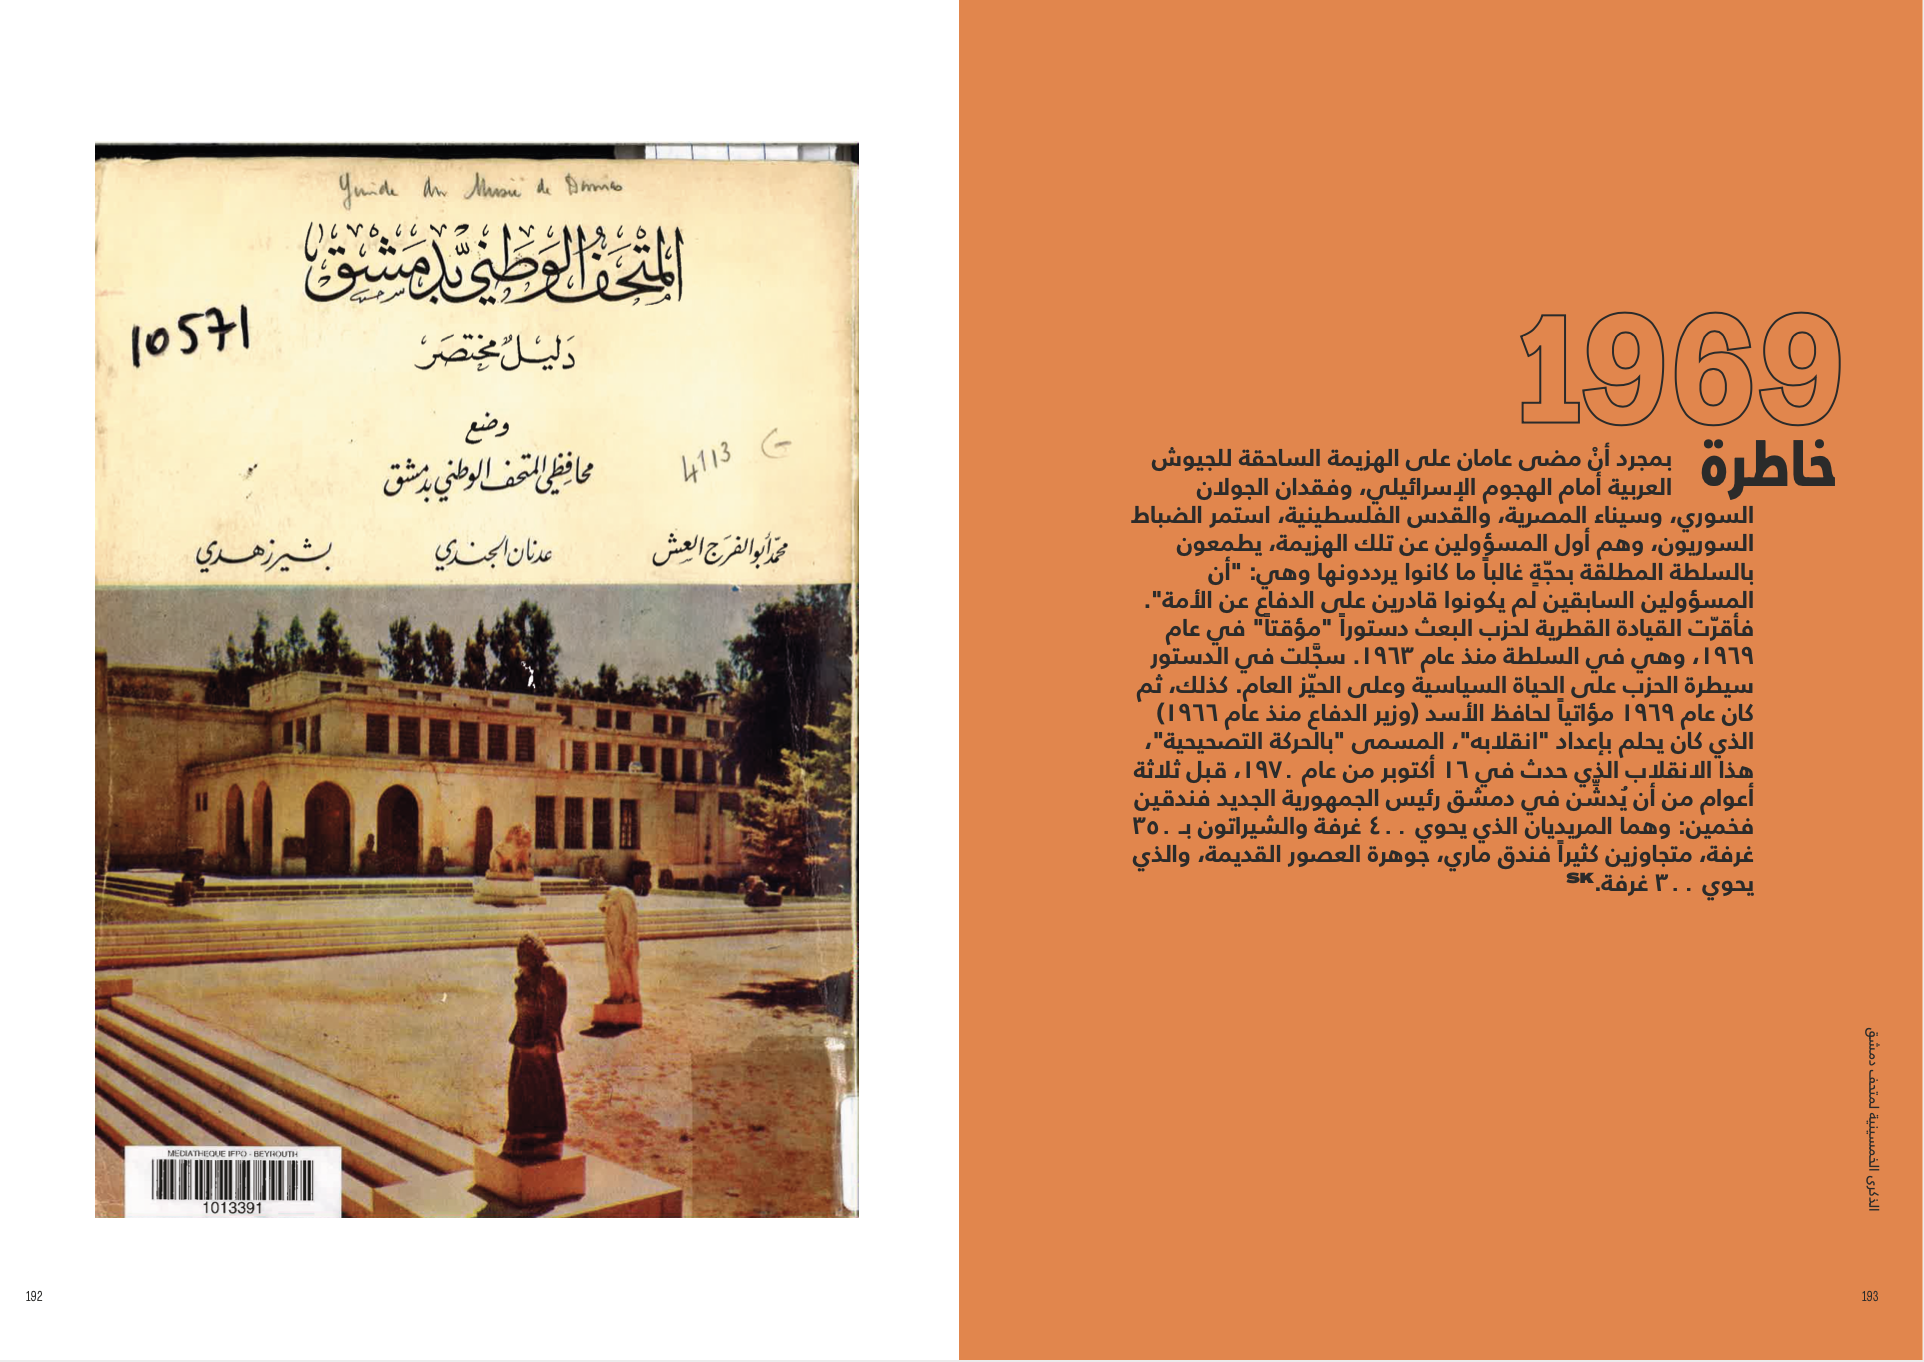 PRÉFACES TO A BOOK FOR A SYRIAN MUSEUM